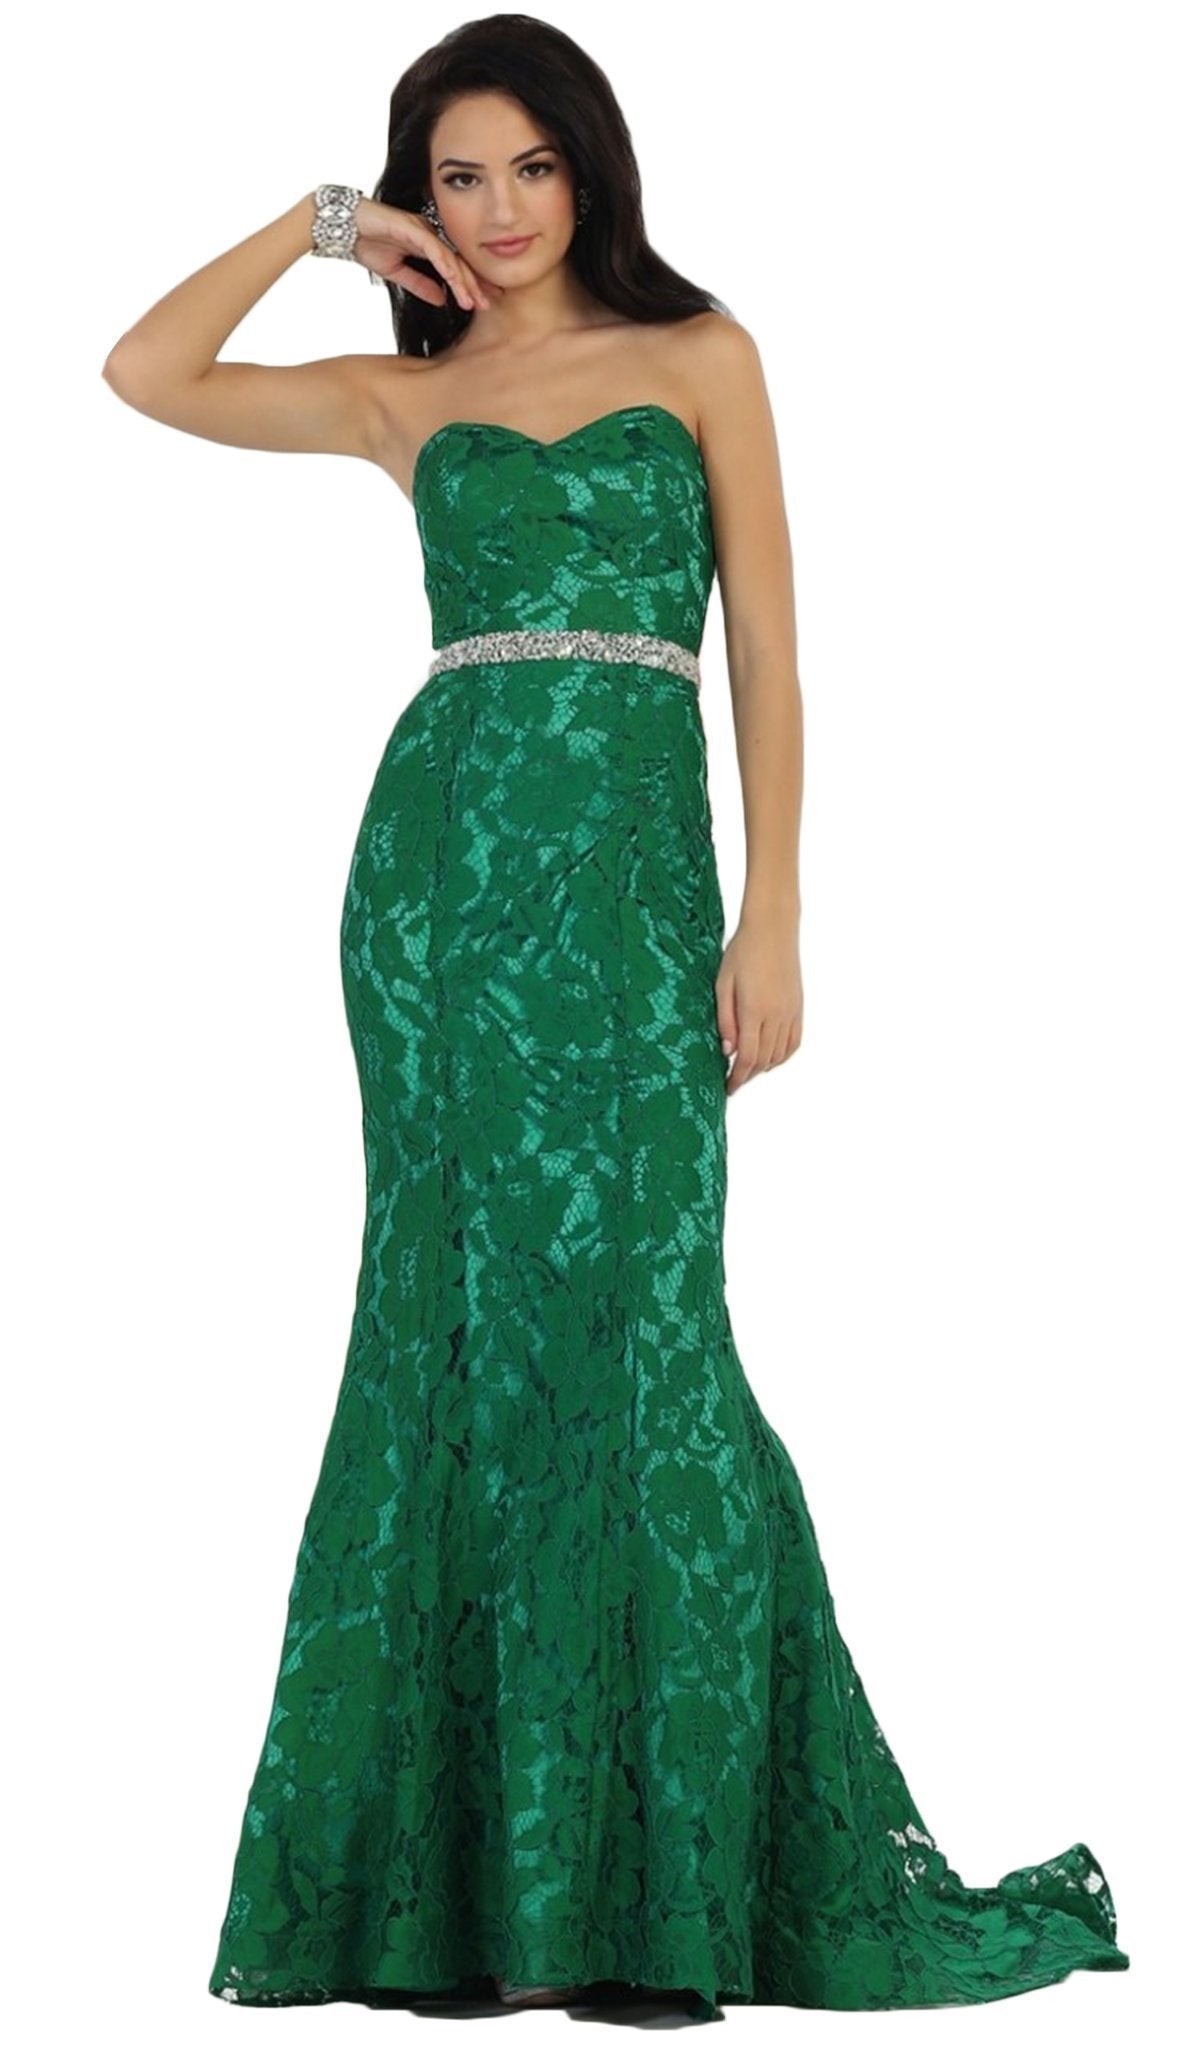 May Queen - Lace Sweetheart Trumpet Evening Dress Special Occasion Dress 2 / Emerald Green